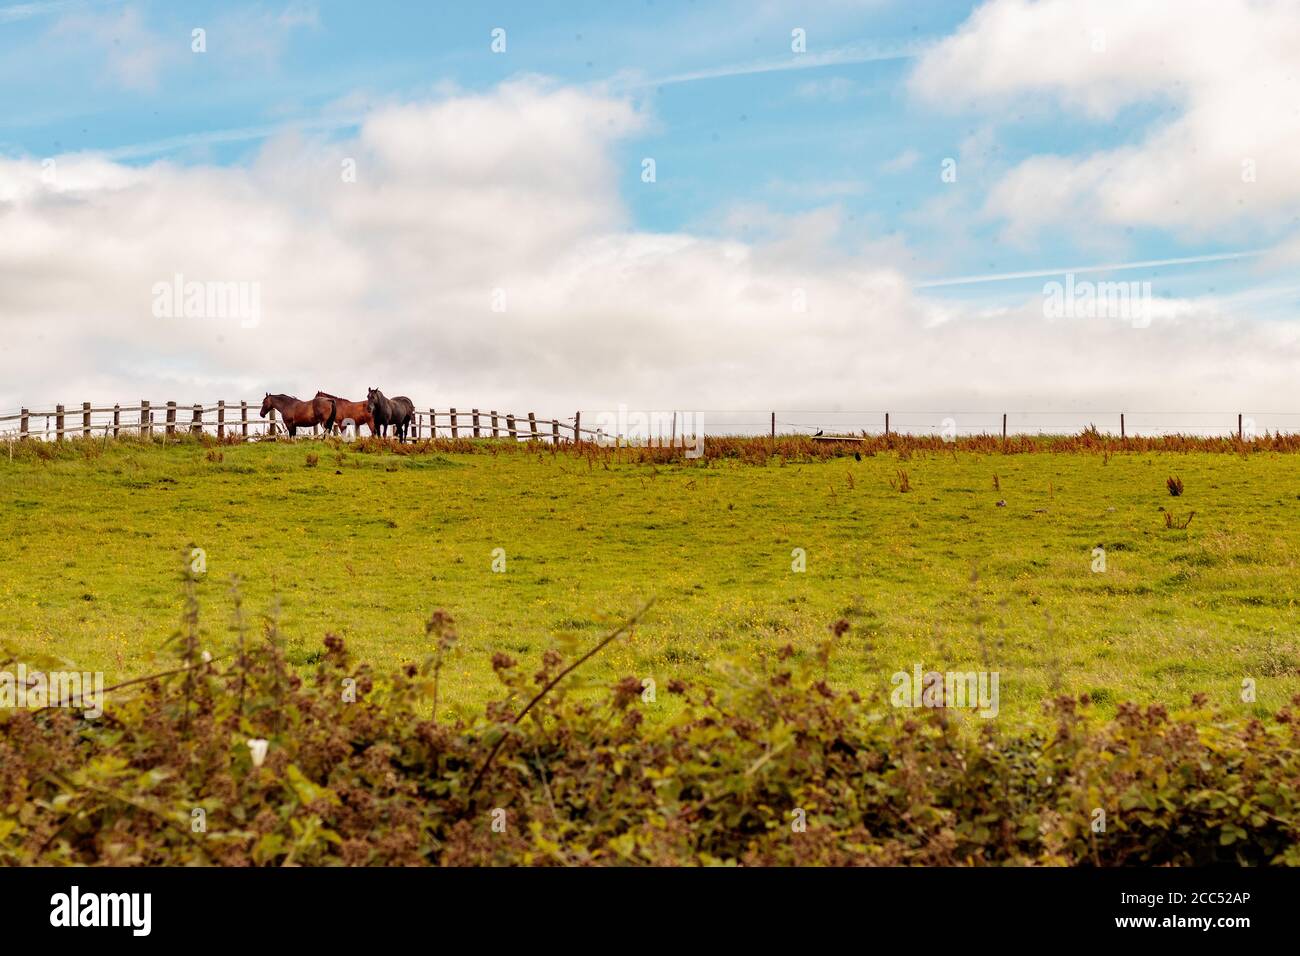 View of horses in a field on a skyline, Ardsley Reservoir Stock Photo